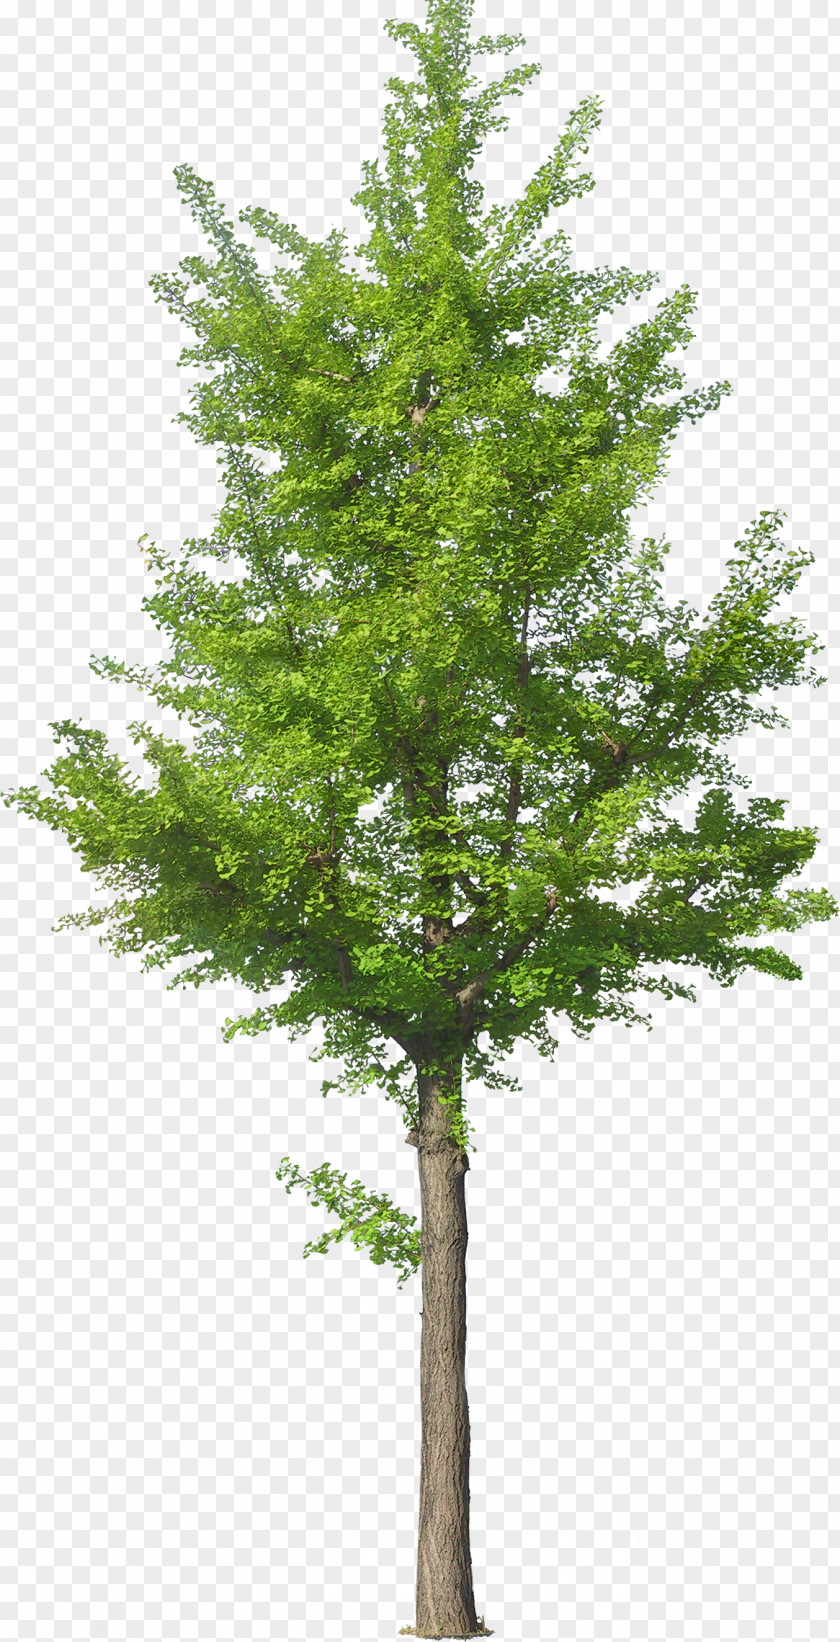 Tree Trees And Shrubs Adobe Photoshop PNG